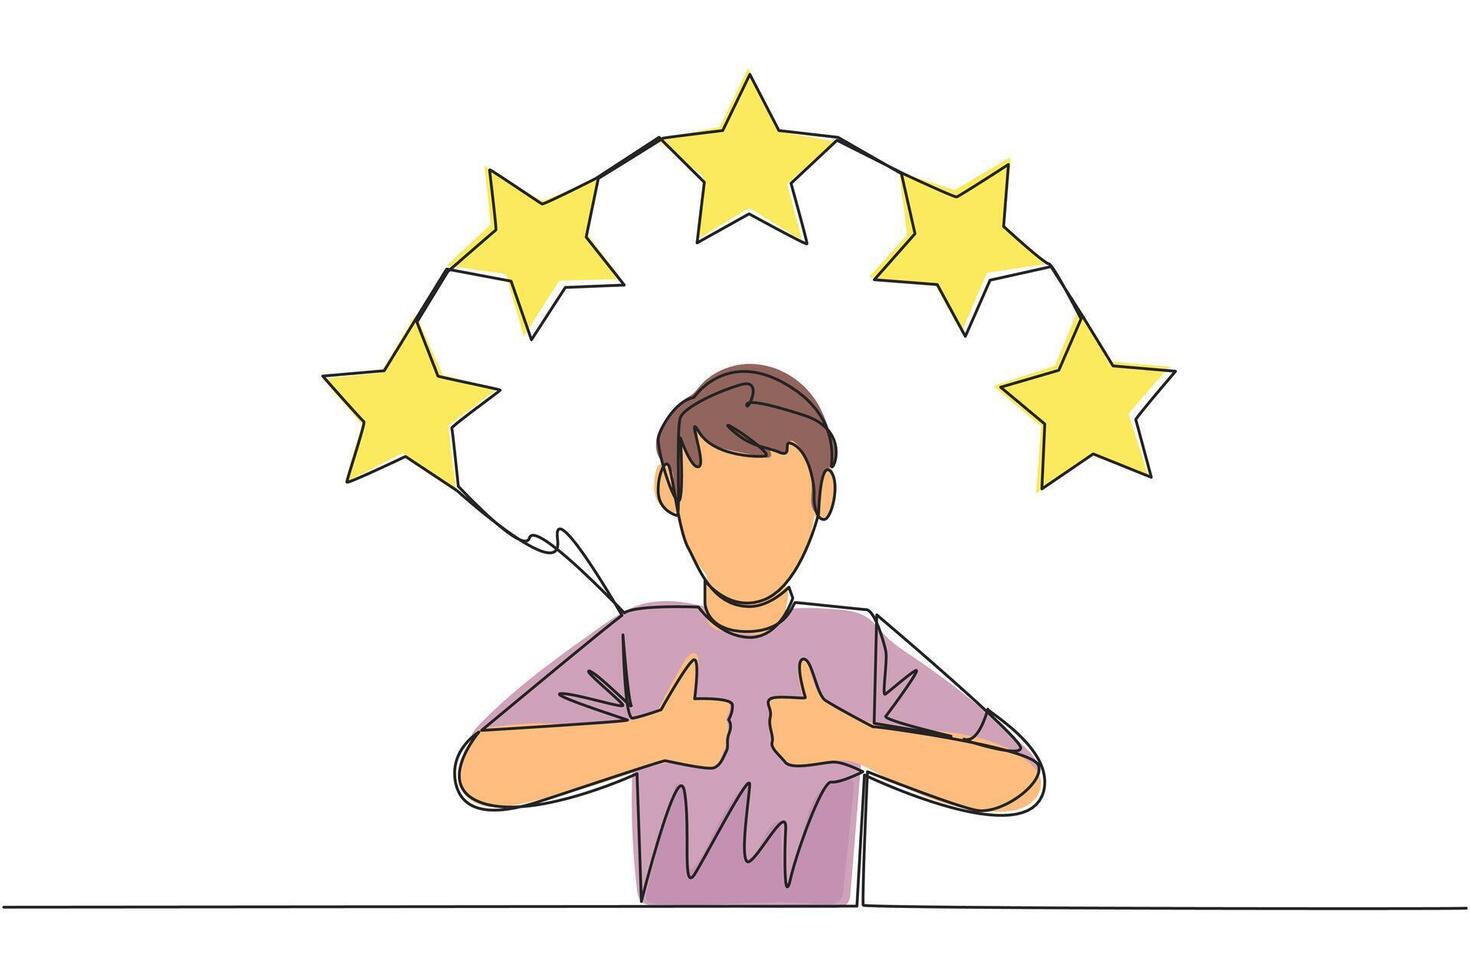 Continuous one line drawing man giving two thumbs up, above head there are 5 stars forming semicircle. Exciting online shopping experience. Review 5 stars. Single line draw design illustration vector